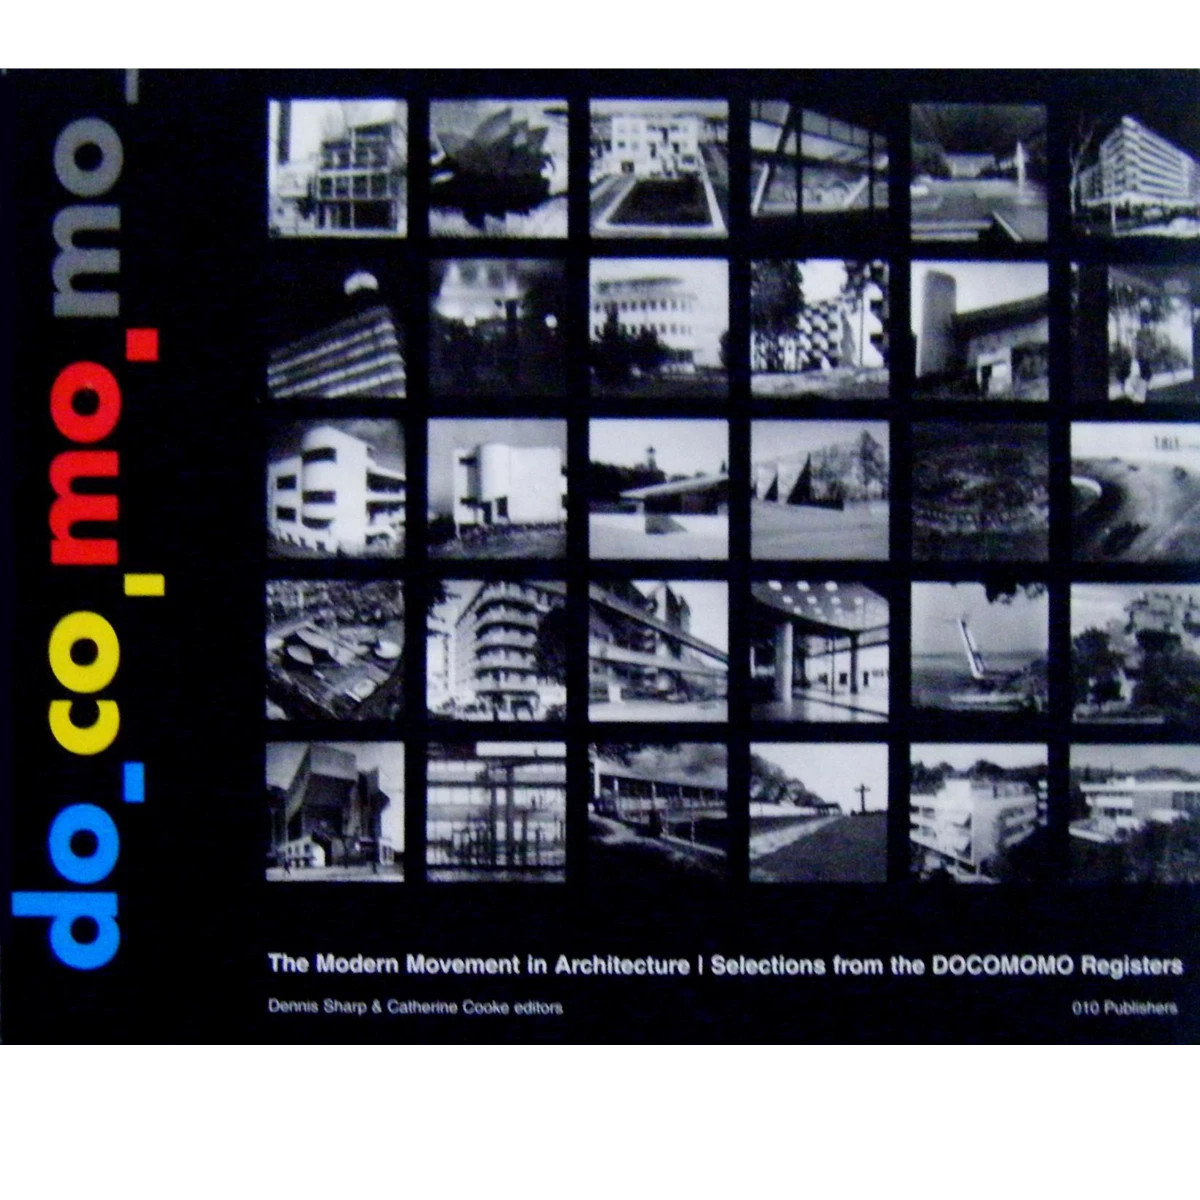 The MM in Architecture: Selections from the Docomomo Registers